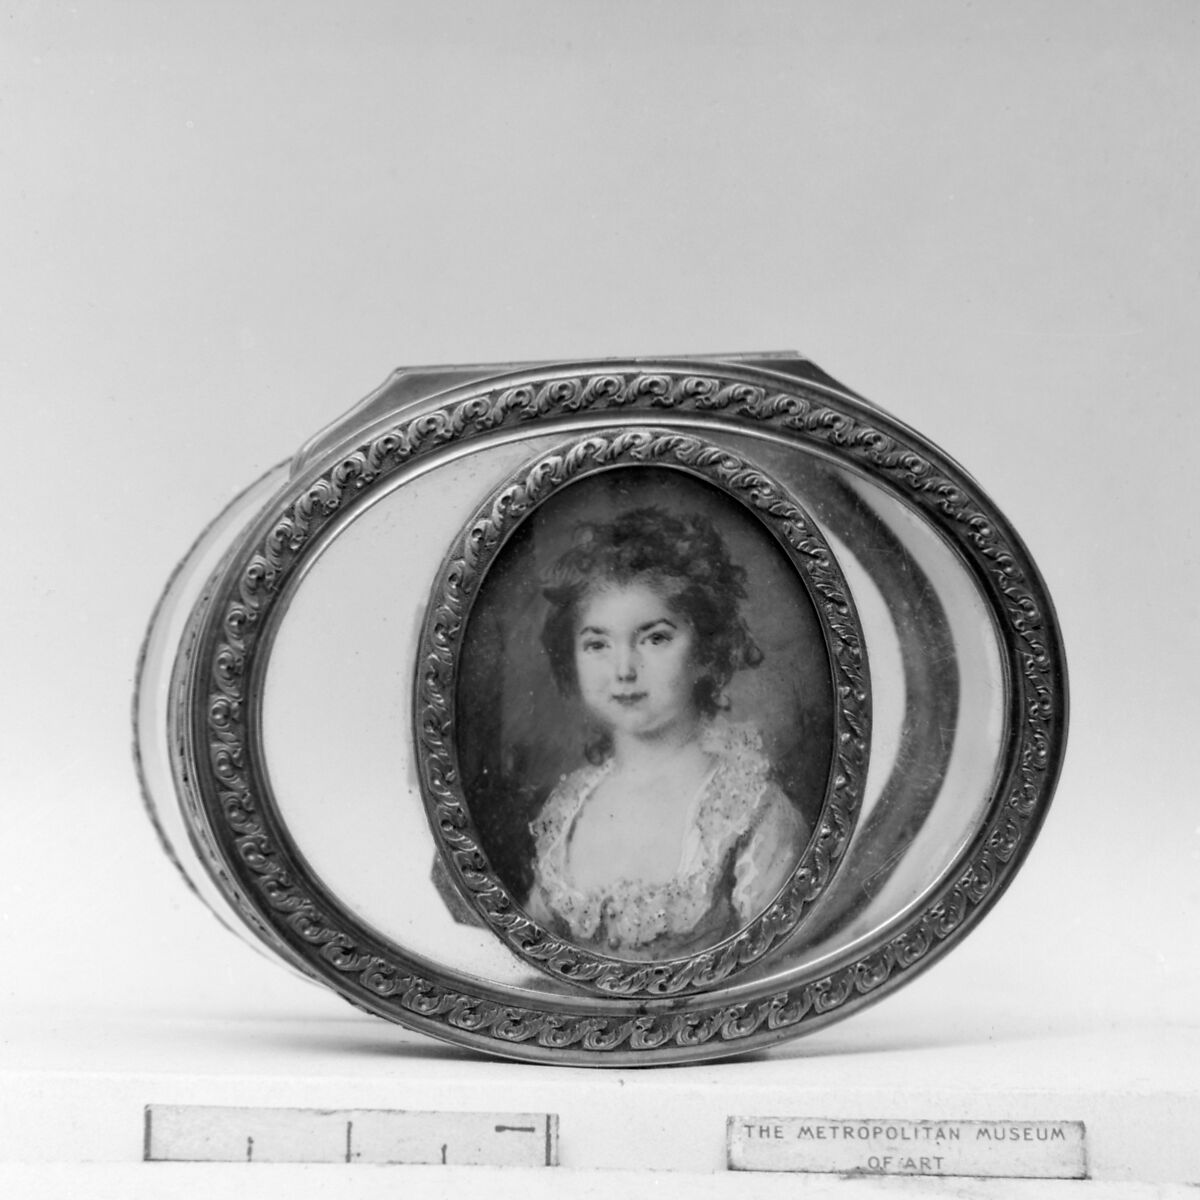 Box with portrait of a young girl with the initials DE, Miniature attributed to Pierre-Adolphe Hall (Swedish (active Paris), 1739–1793), Glass, gold; ivory laid on card, French, Paris 